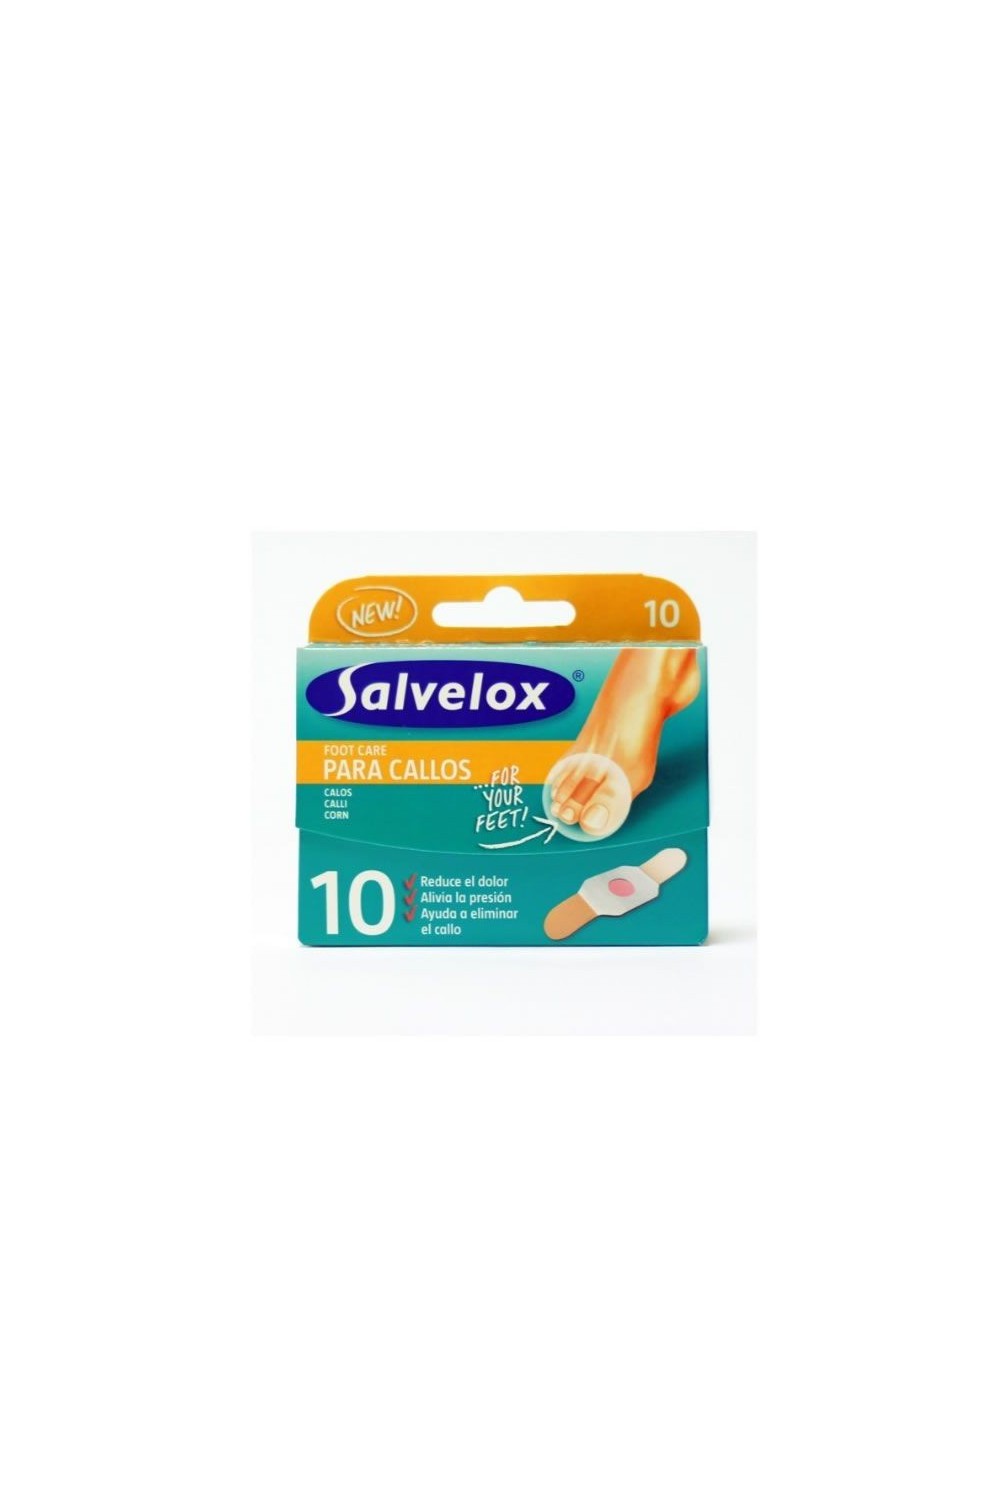 Salvelox Foot Care For Corn 10 Units